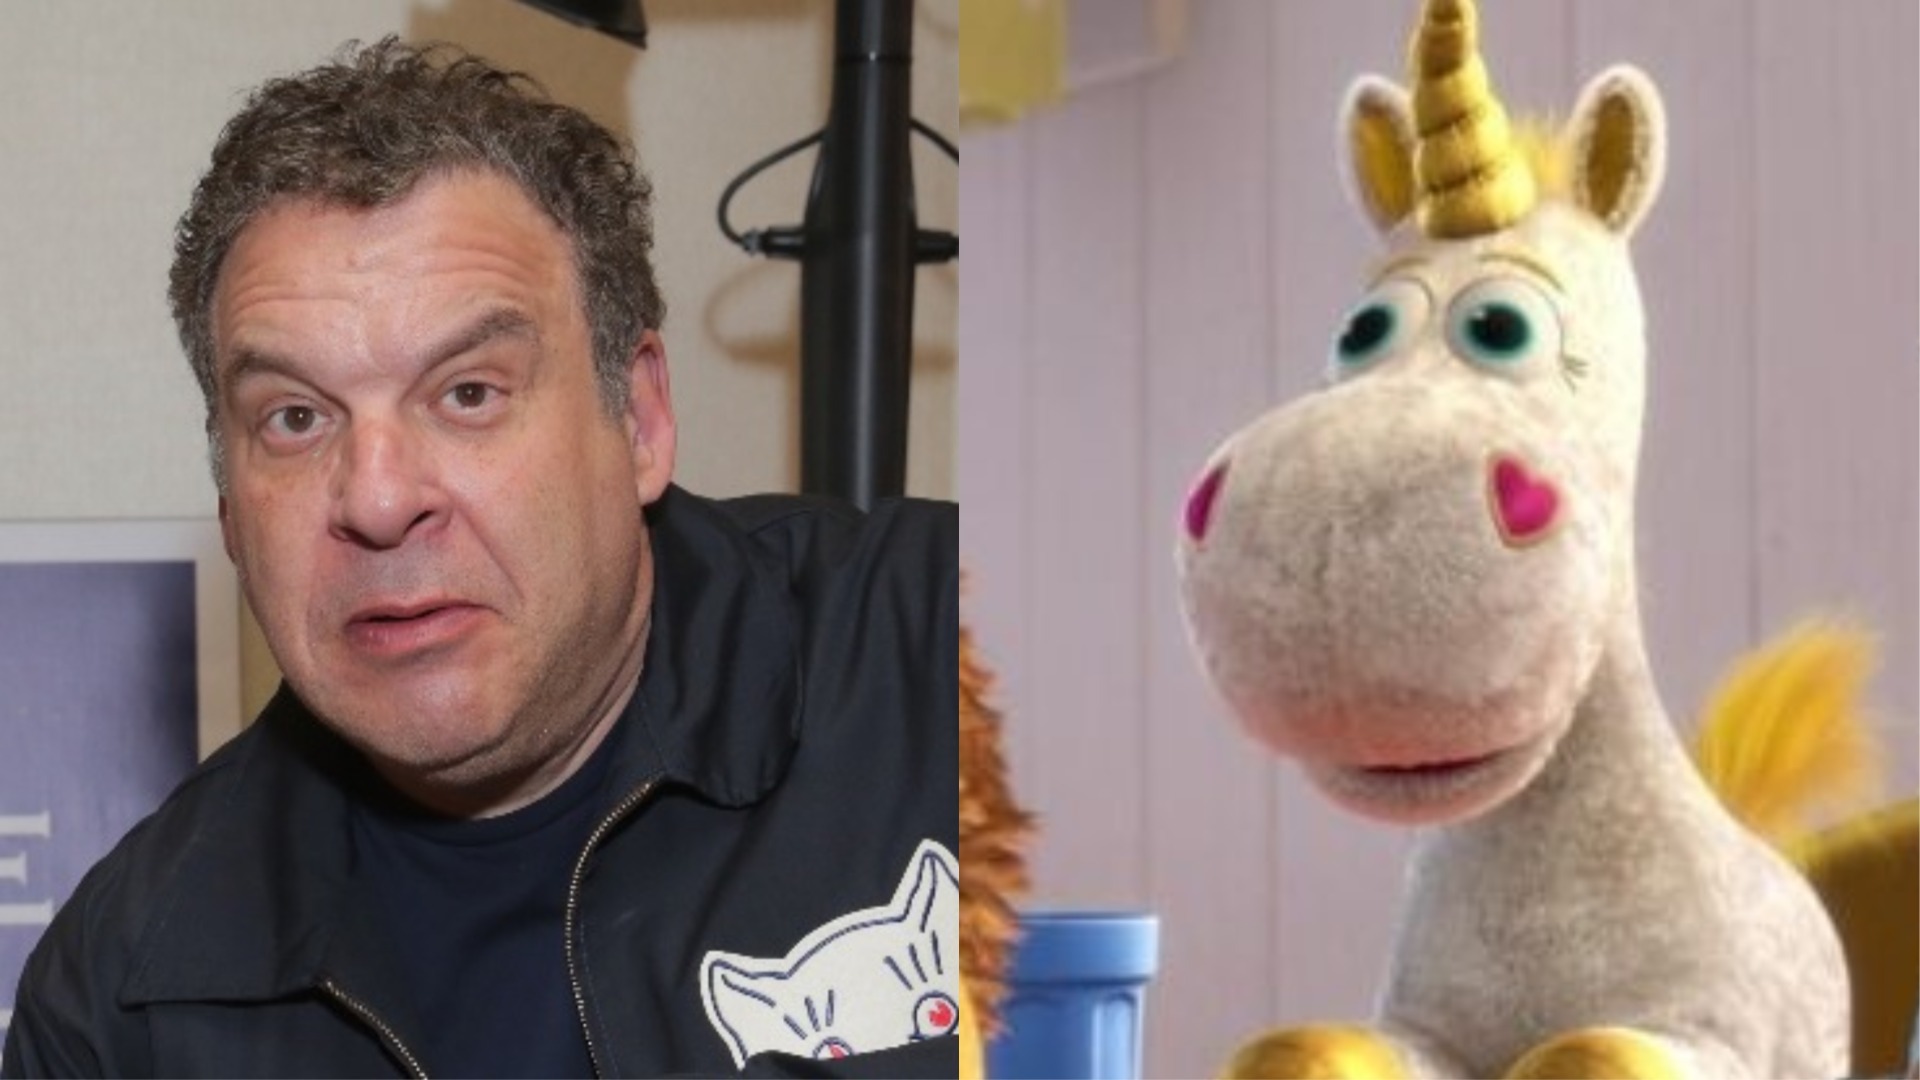 Jeff-Garlin-and-Buttercup-From-Toy-Story-4